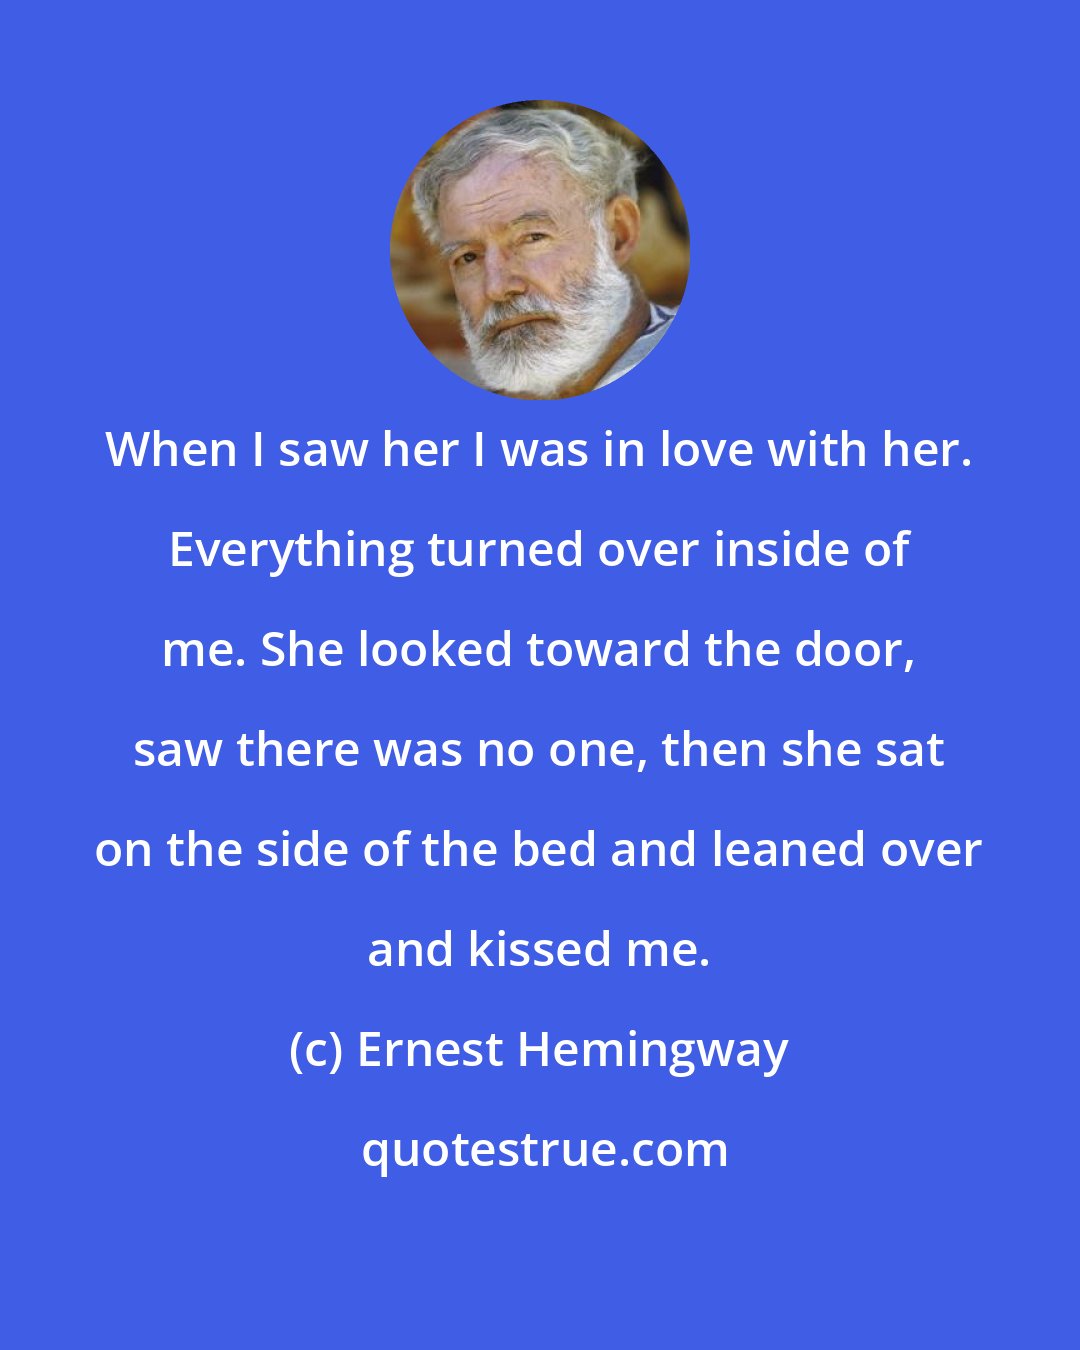 Ernest Hemingway: When I saw her I was in love with her. Everything turned over inside of me. She looked toward the door, saw there was no one, then she sat on the side of the bed and leaned over and kissed me.